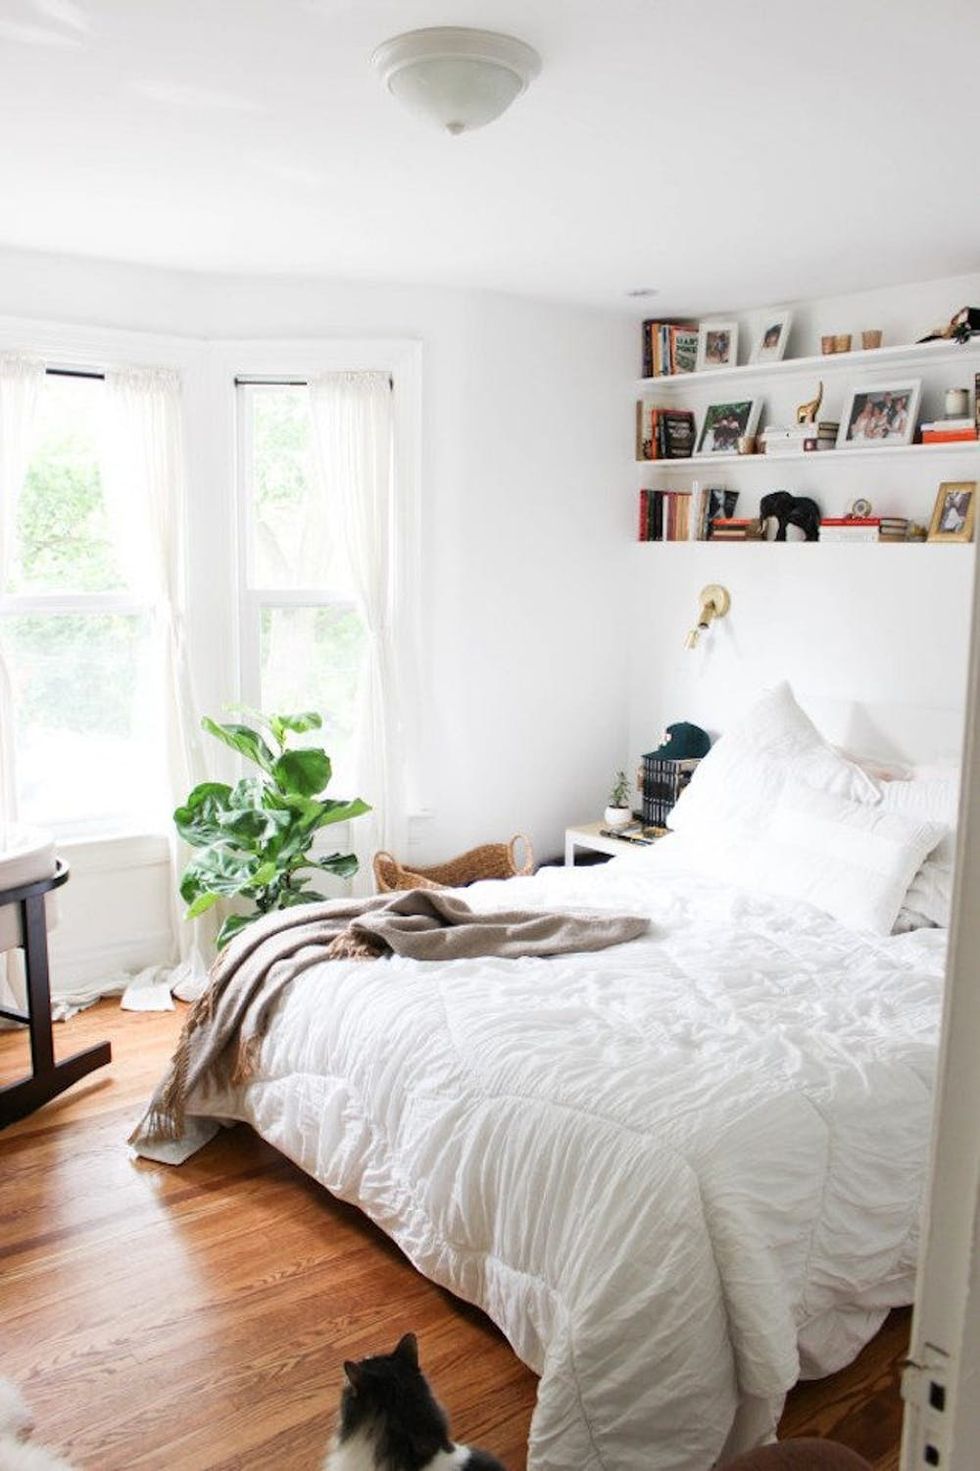 20 Times The Internet Showed Us That Shelves Above The Bed Are A